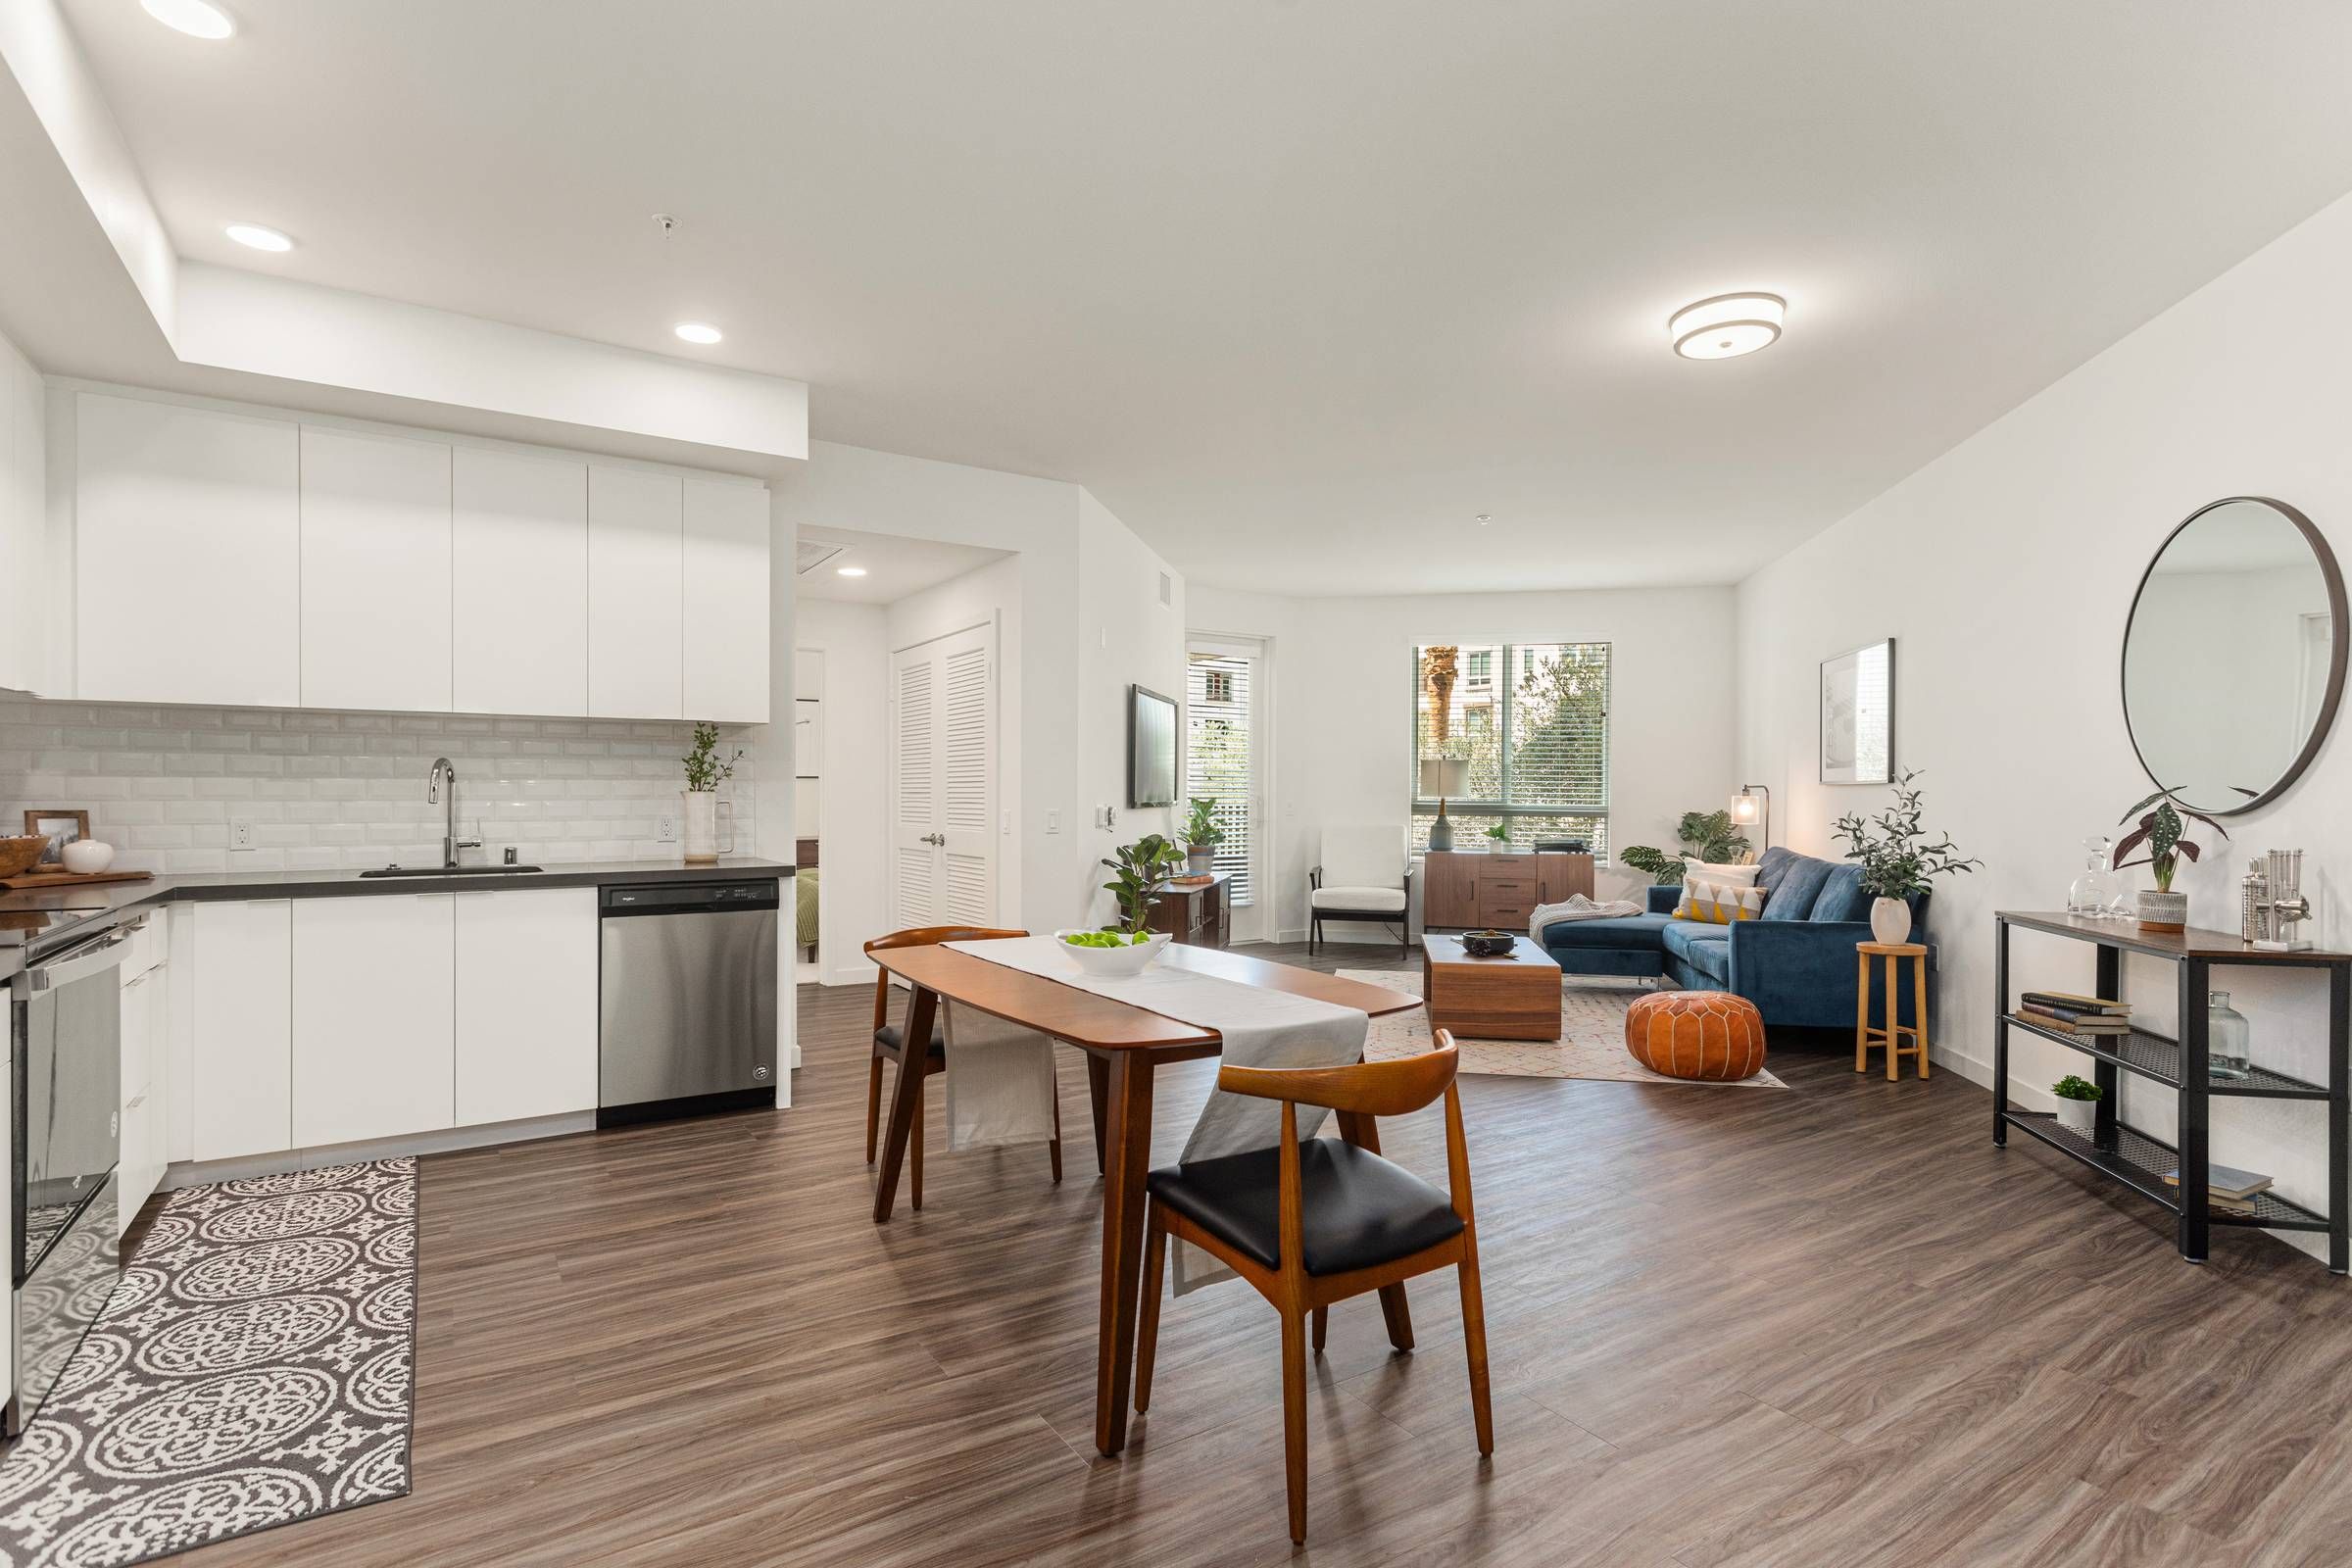 Inside an Alta Upland apartment, an open plan design combines a sleek, modern kitchen with a dining area and a comfortable living space accented with vibrant blue furniture.